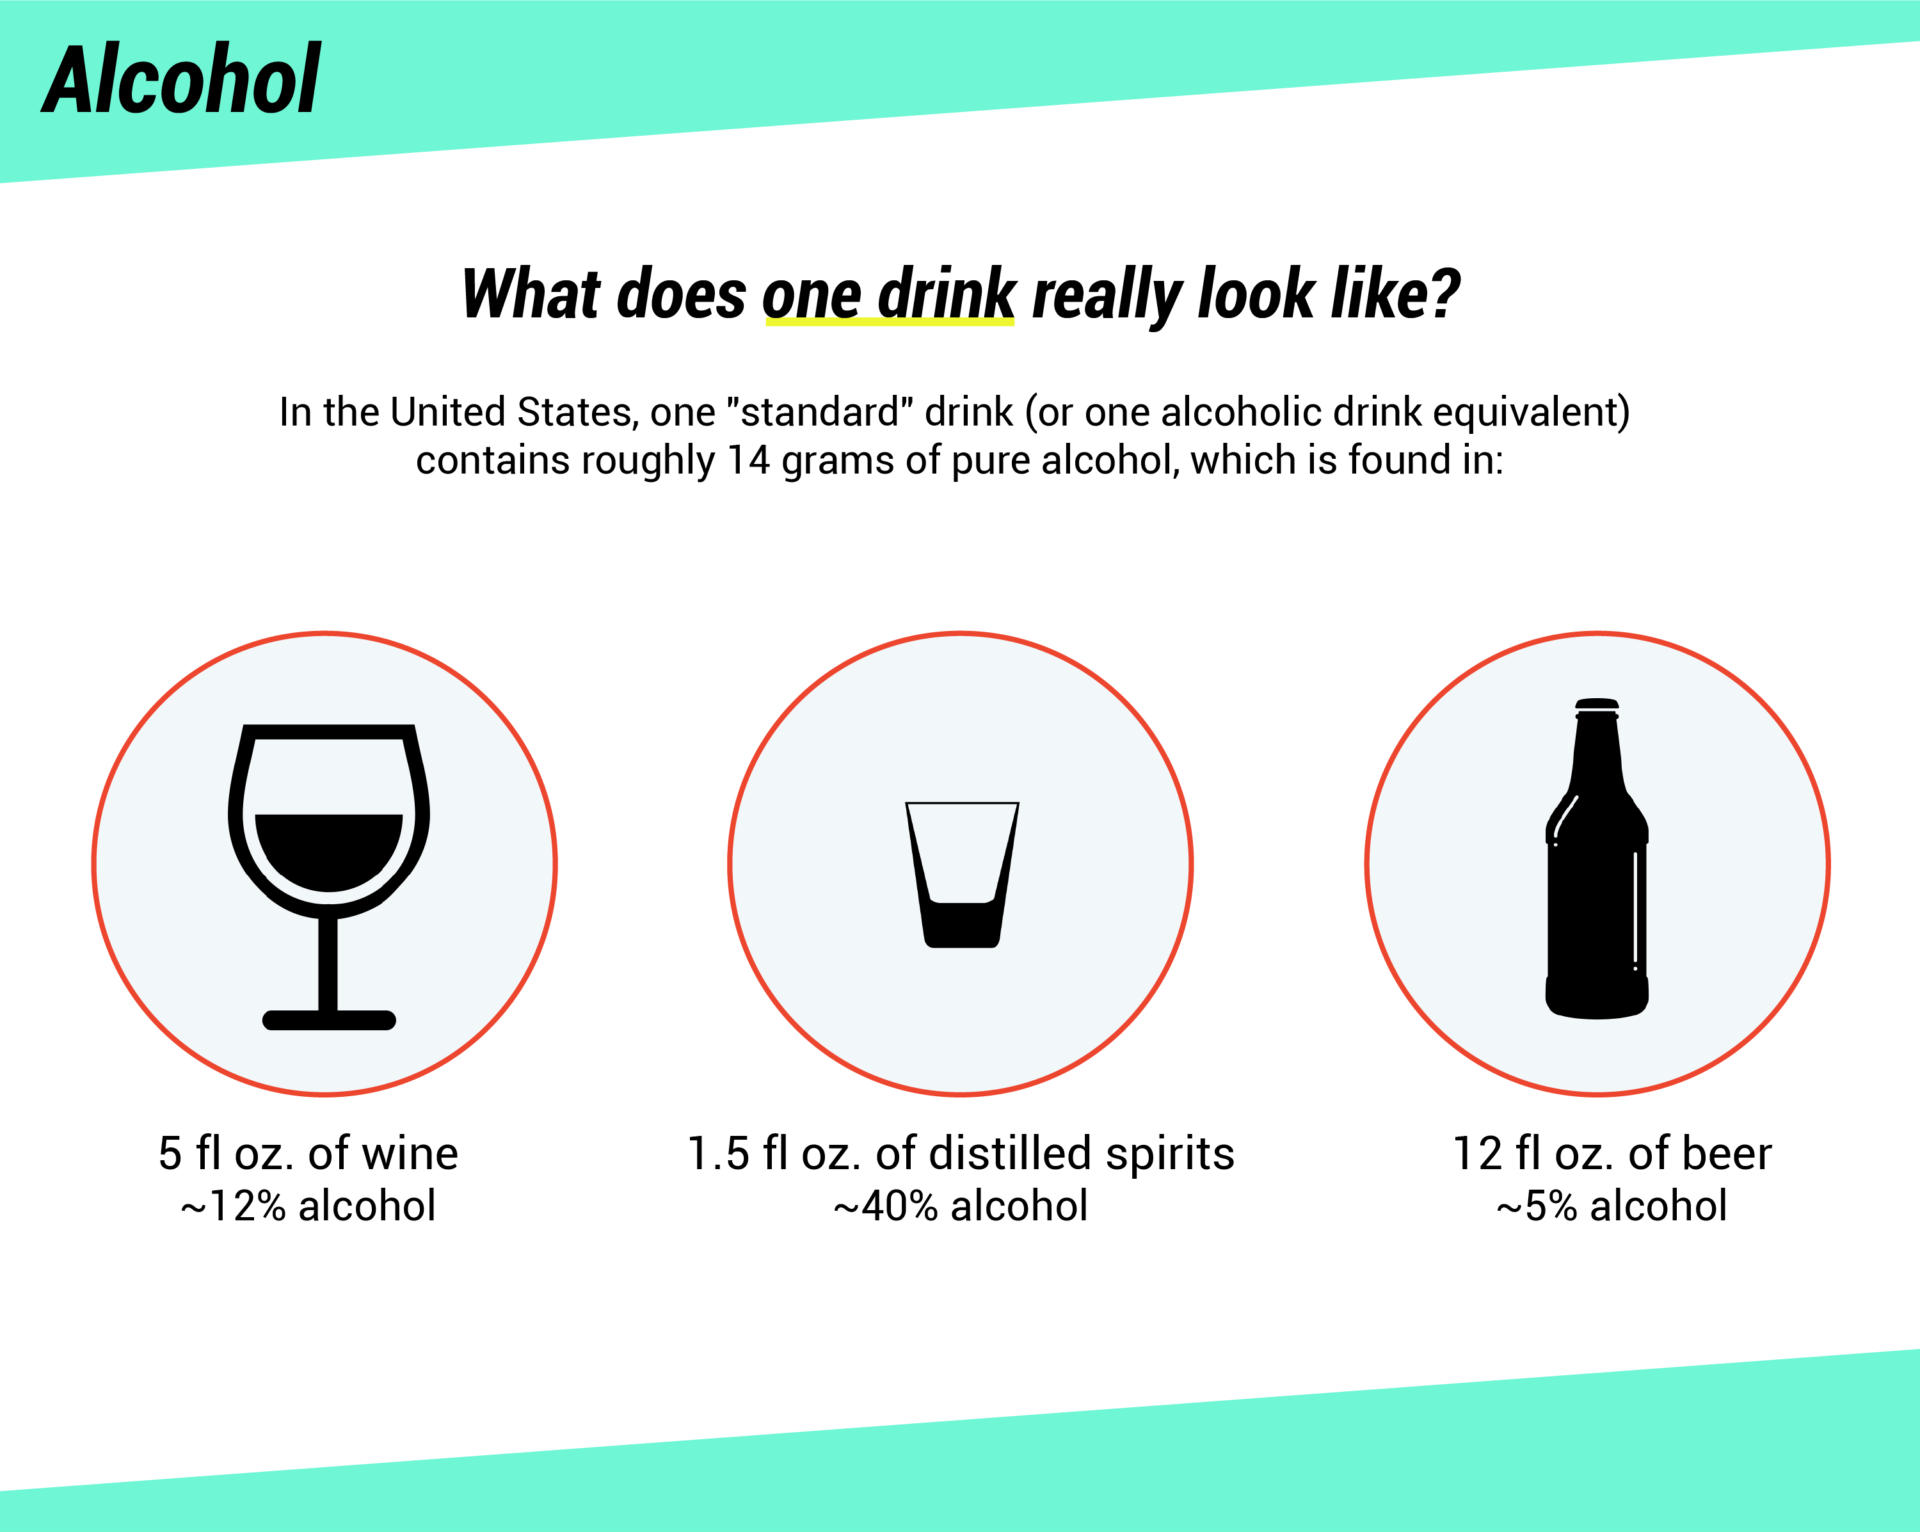 An infographic showing what one standard alcoholic drink looks like